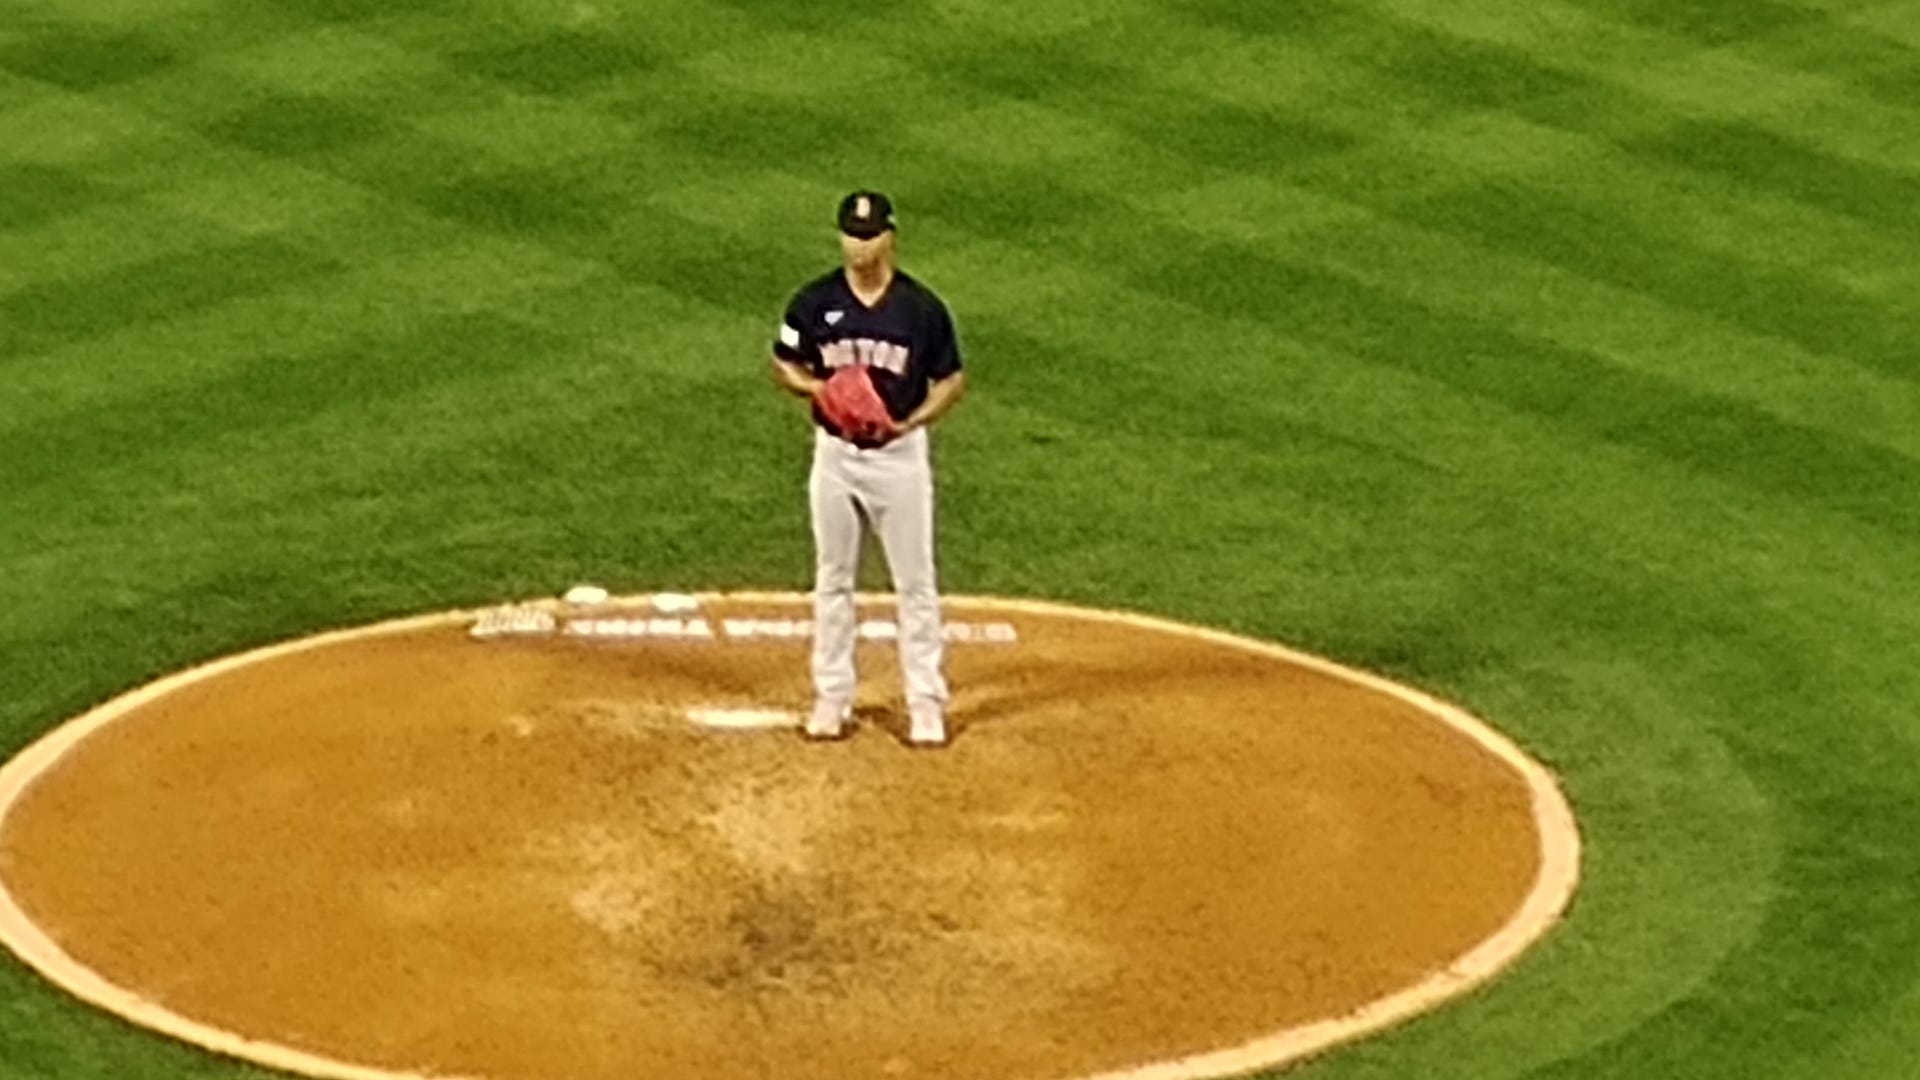 Using its maximum 16x digital zoom, the phone can zoom in from the cheap seats to see the pitcher on the mound in a baseball game, albeit in fuzzy detail.